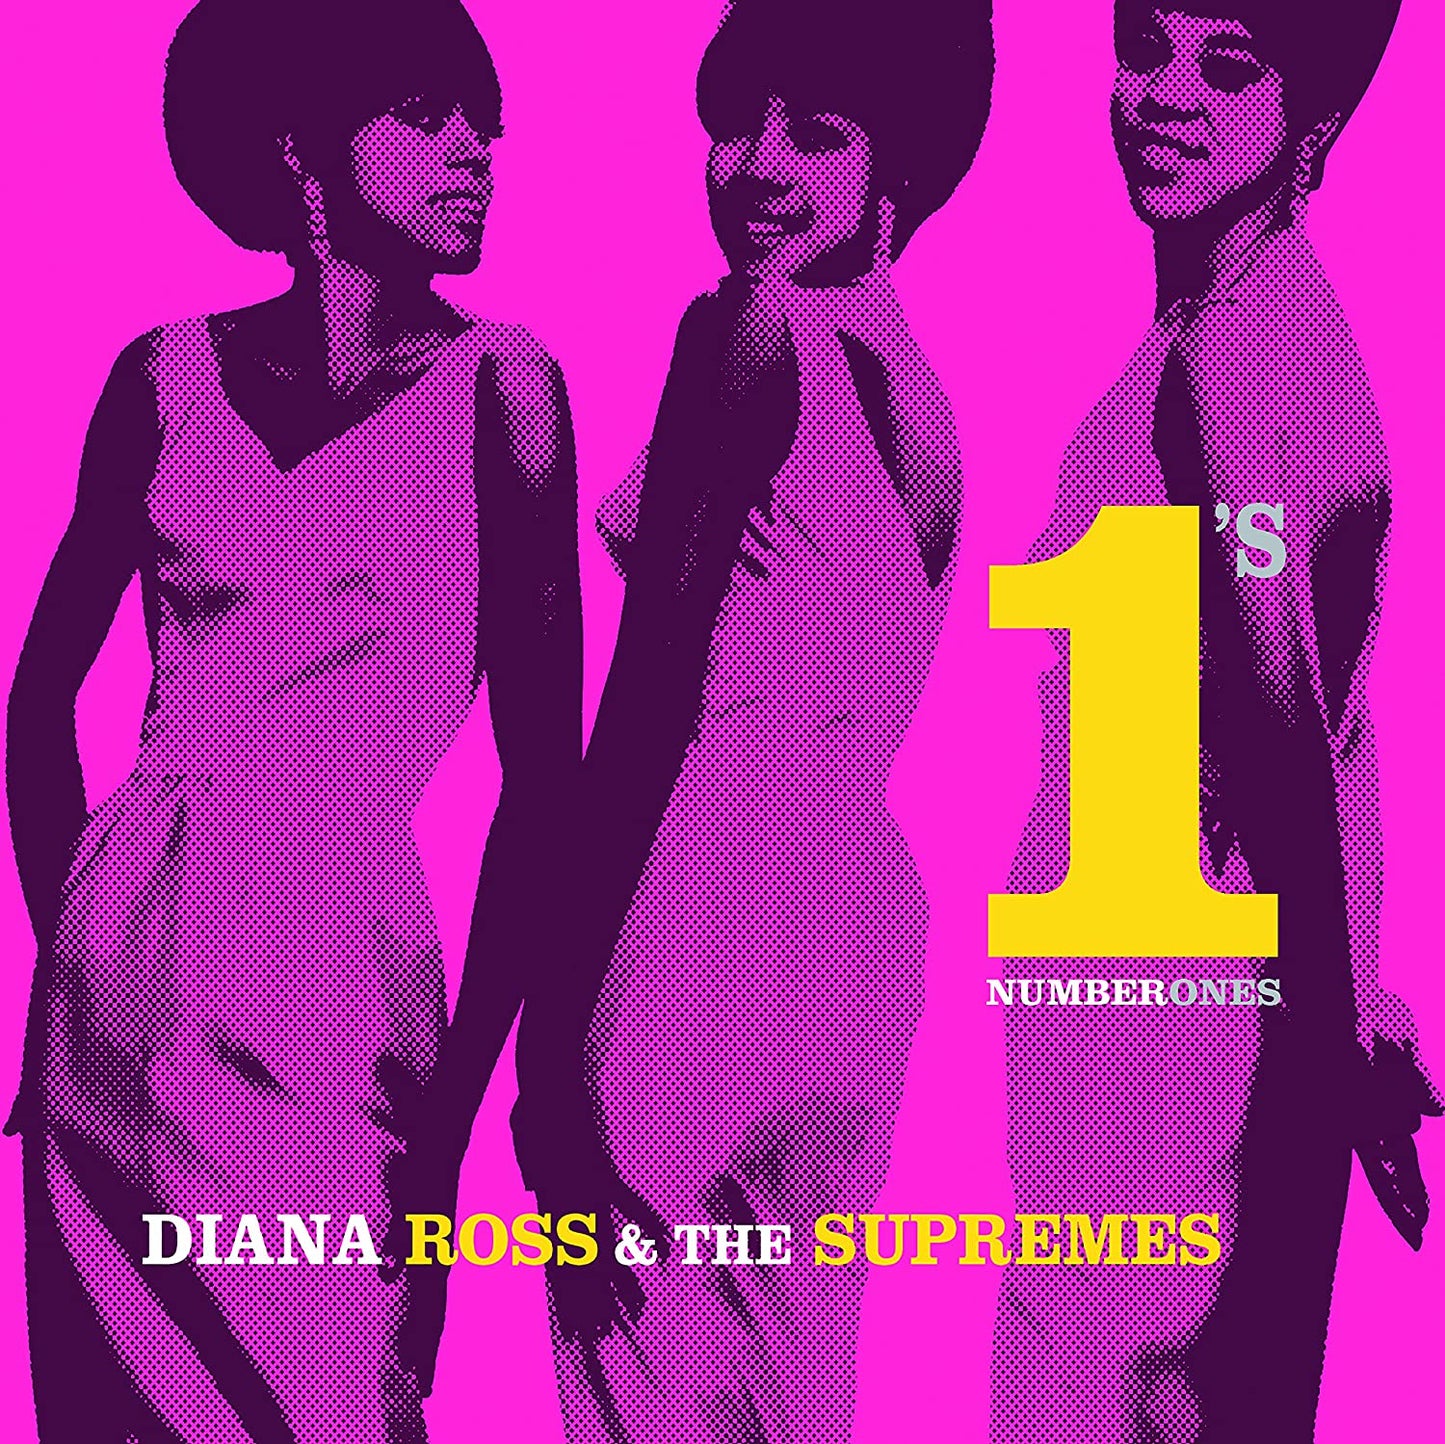 DIANA ROSS & THE SUPREMES - NUMBER ONES - VINYL LP